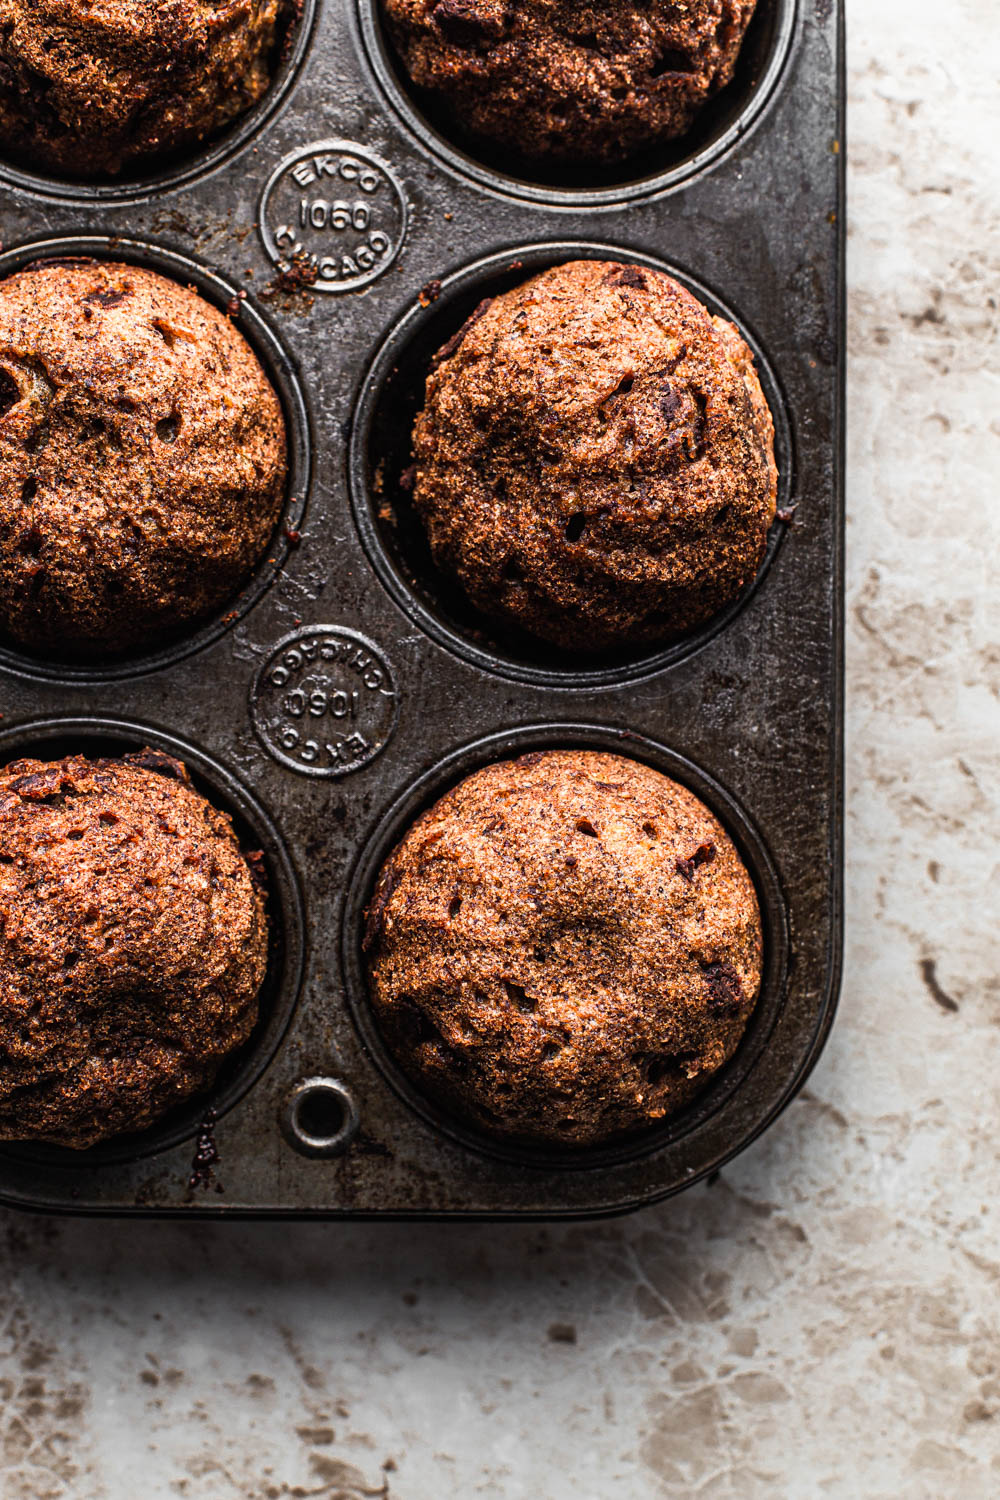 banana Chocolate Chip Muffins in a vintage muffin pan food photography